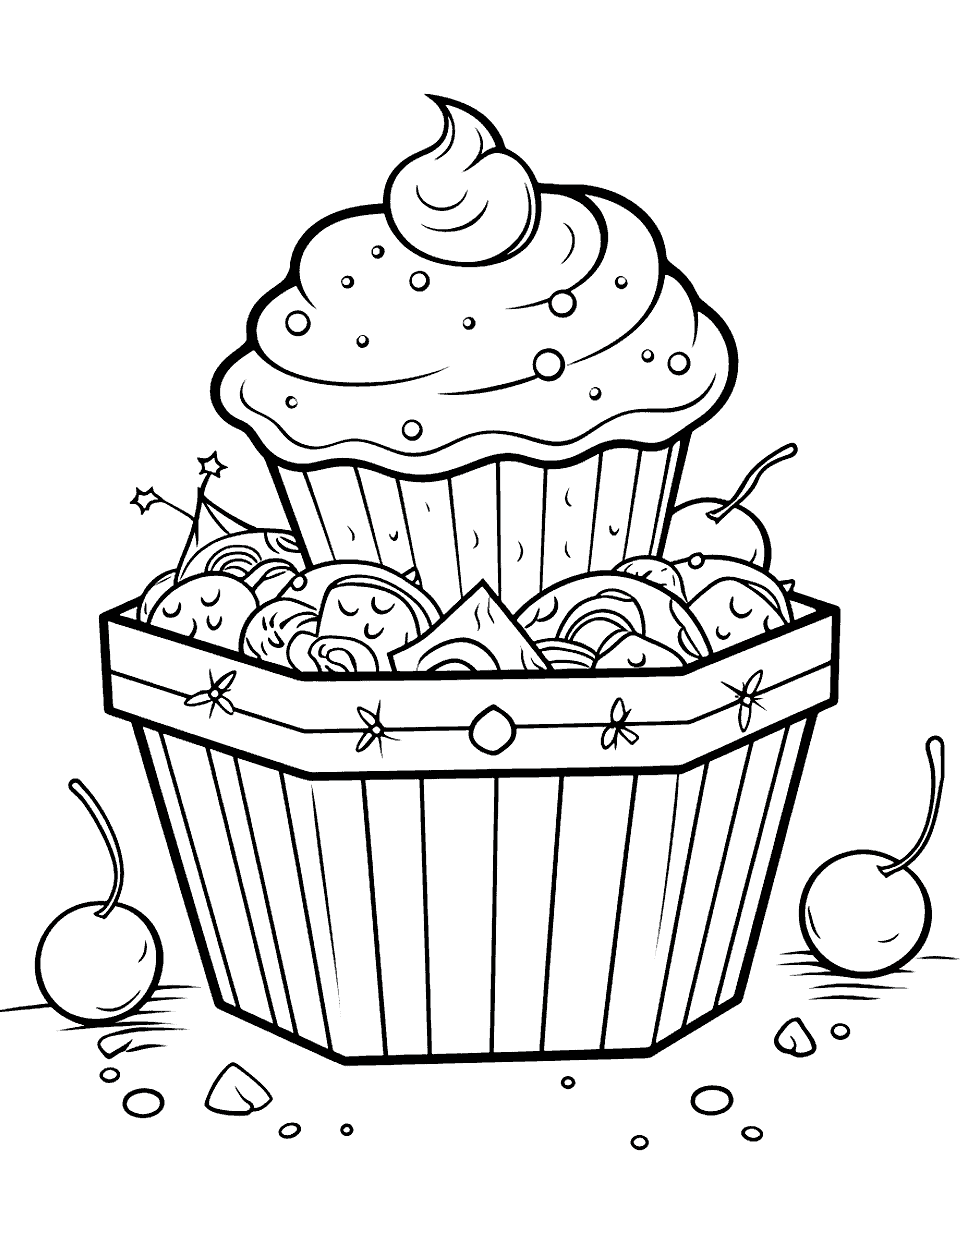 Cupcake and a Treasure Chest Coloring Page - A cupcake in a treasure chest filled with jewels.